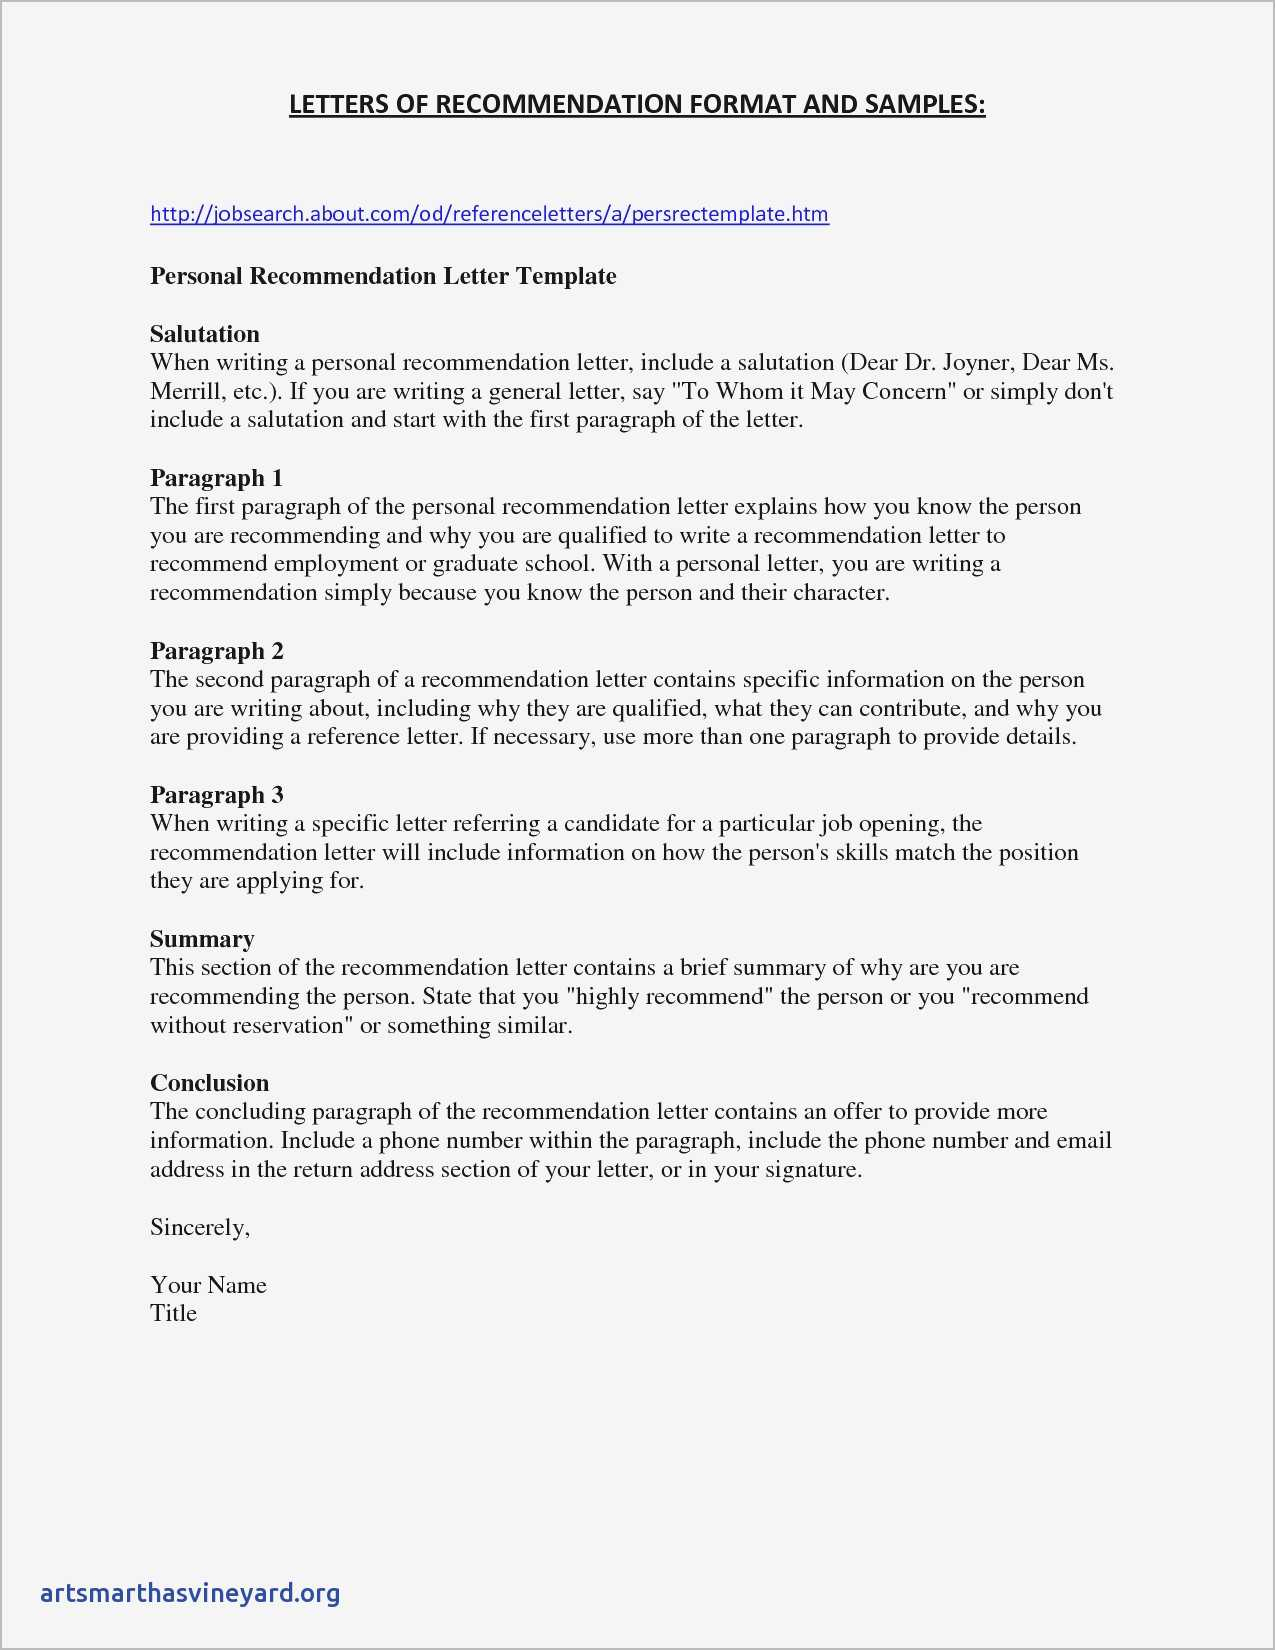 Personal Character Reference Letter Template - Sample Personal Reference Letter for A Friend Samples From Character